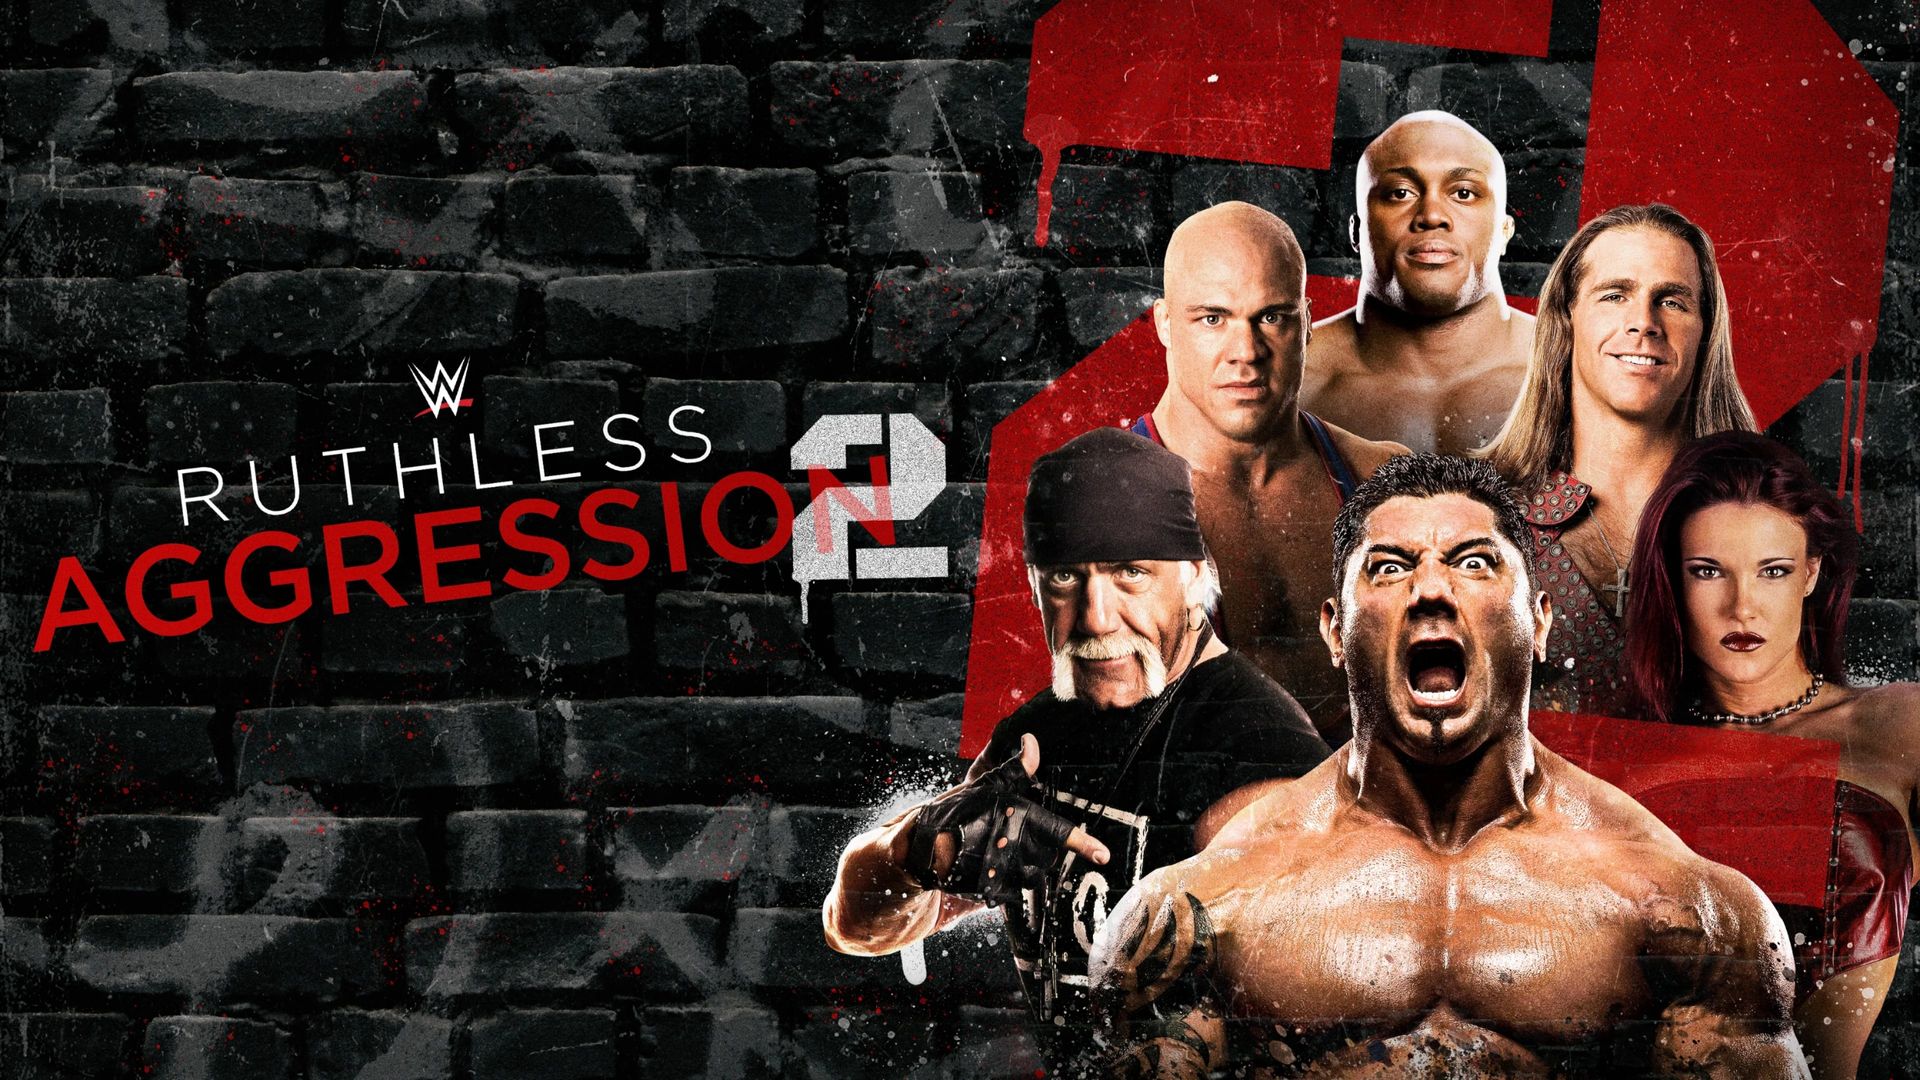 WWE Ruthless Aggression background